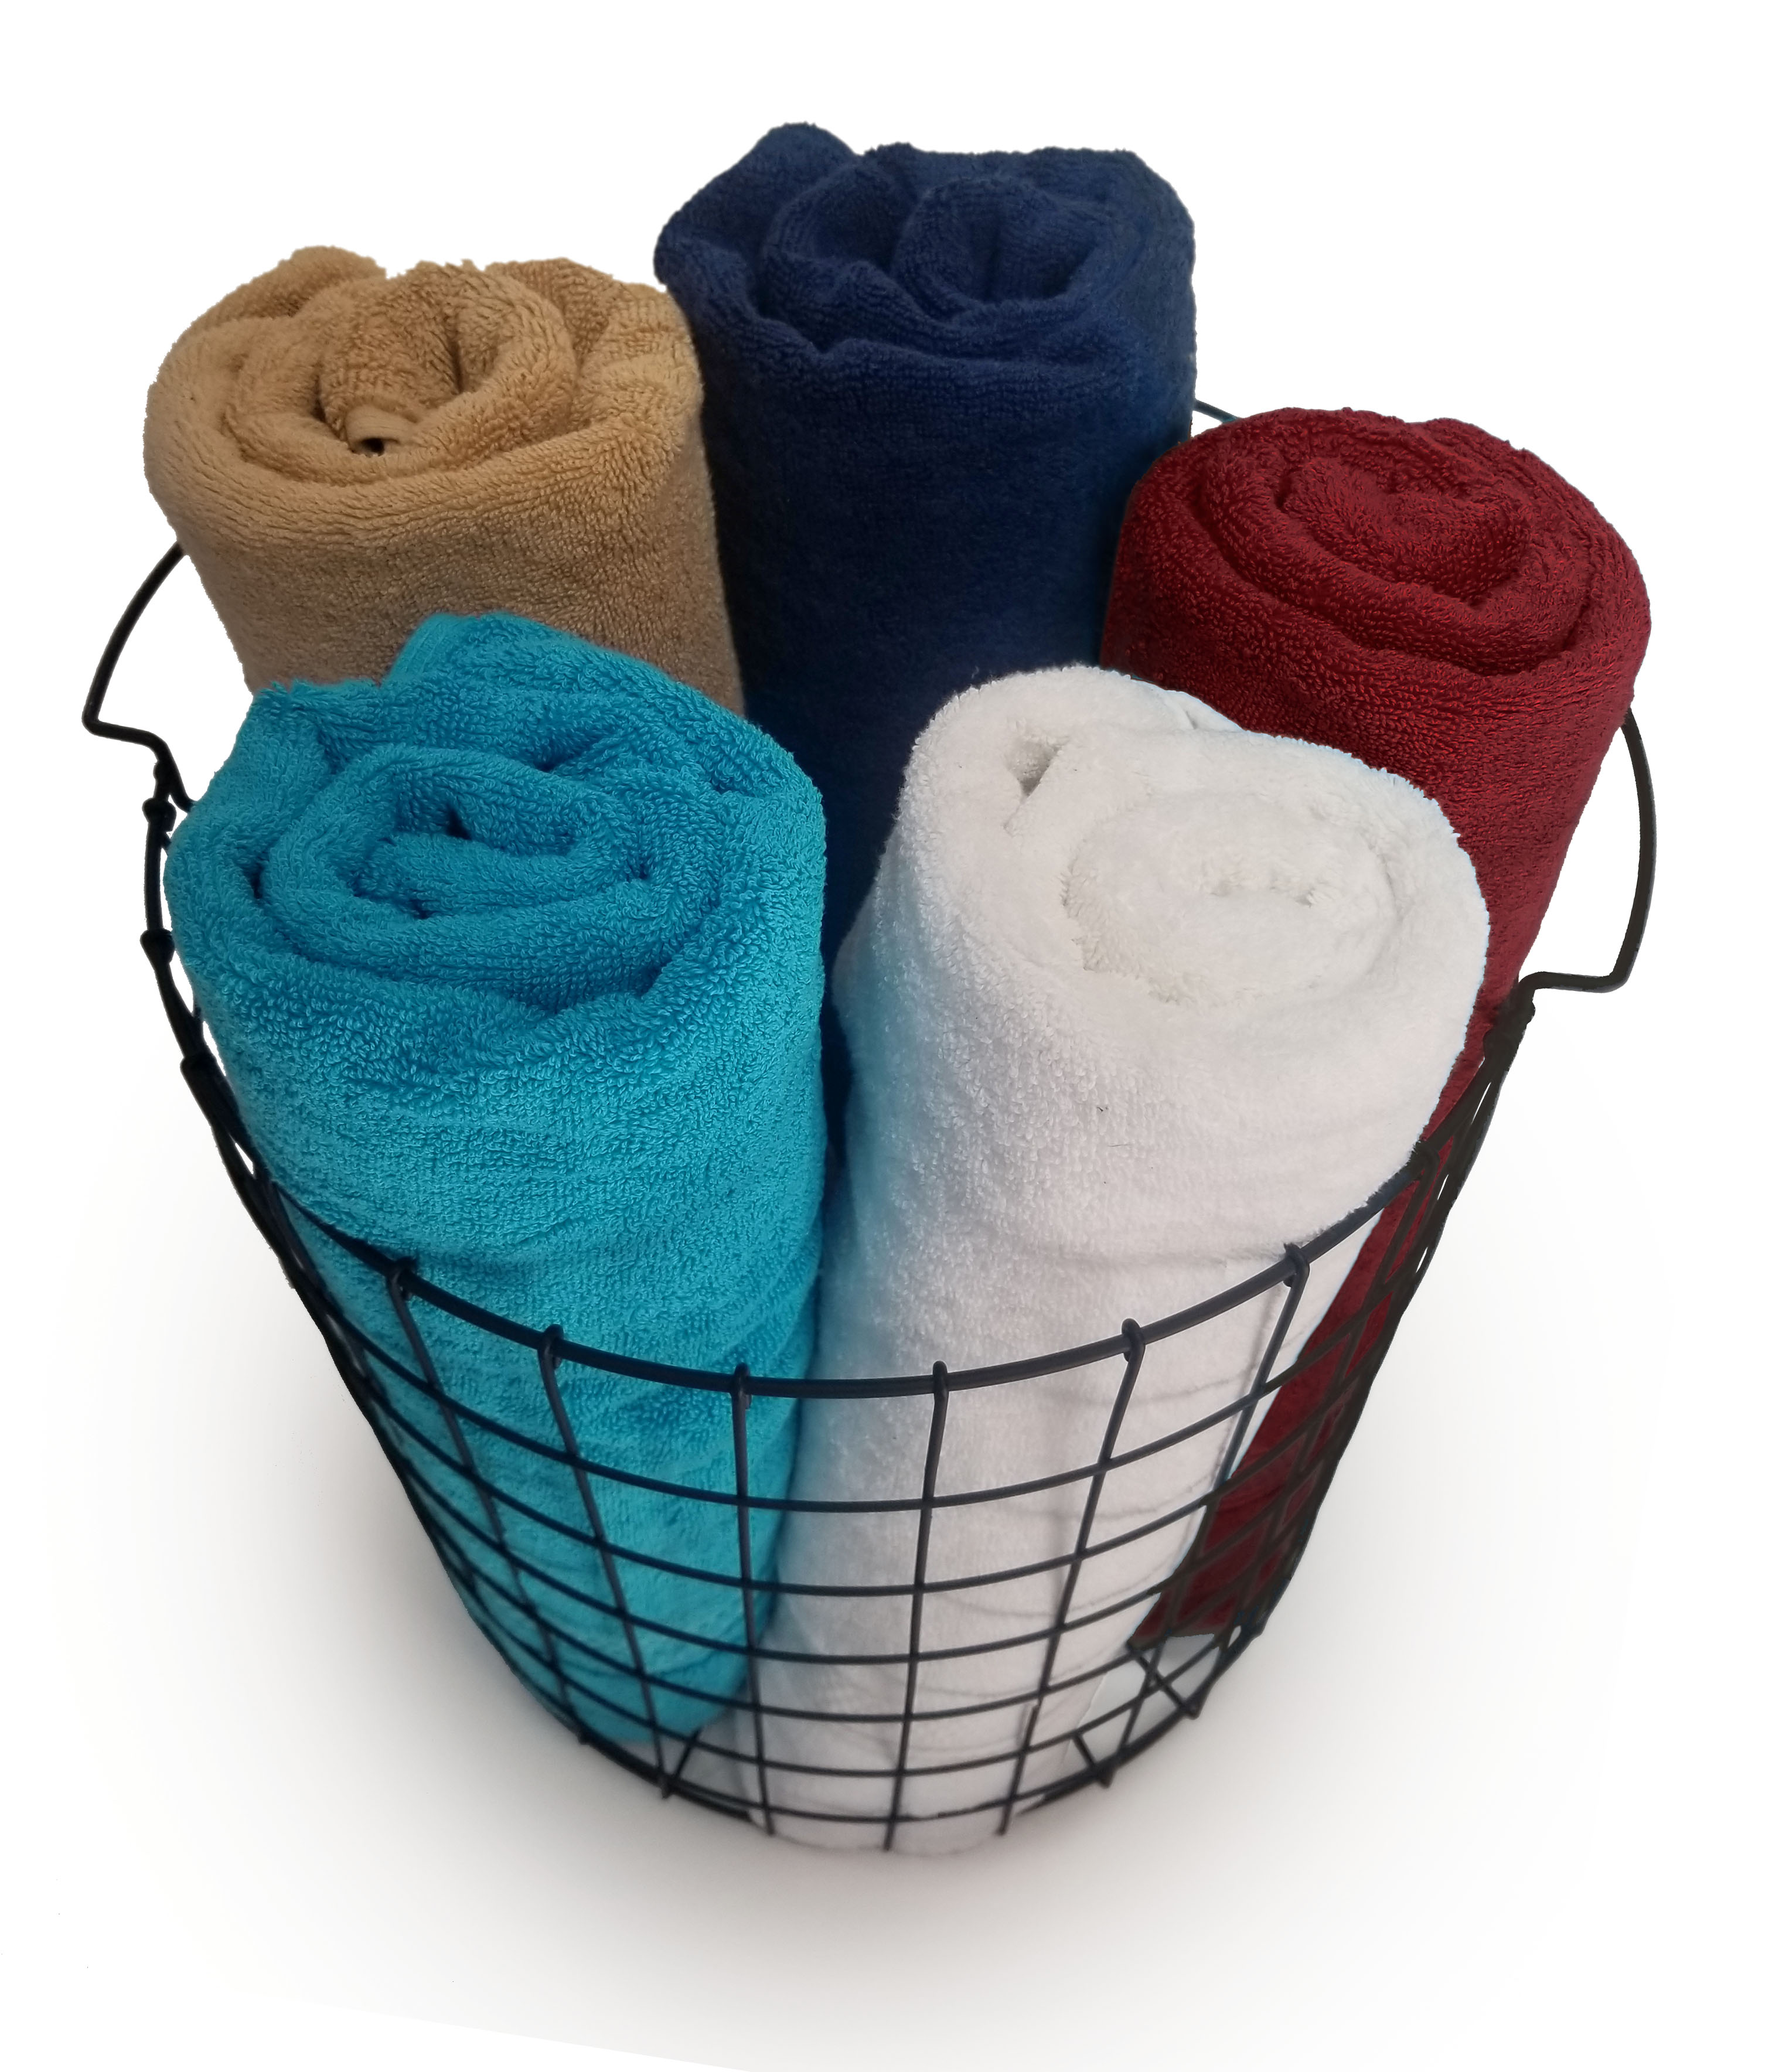 4 PC Set SHIPPING INCLUDED  27x54 Bath Towels by Royal Comfort Woven   RING SPUN COTTON  17.5 Lbs